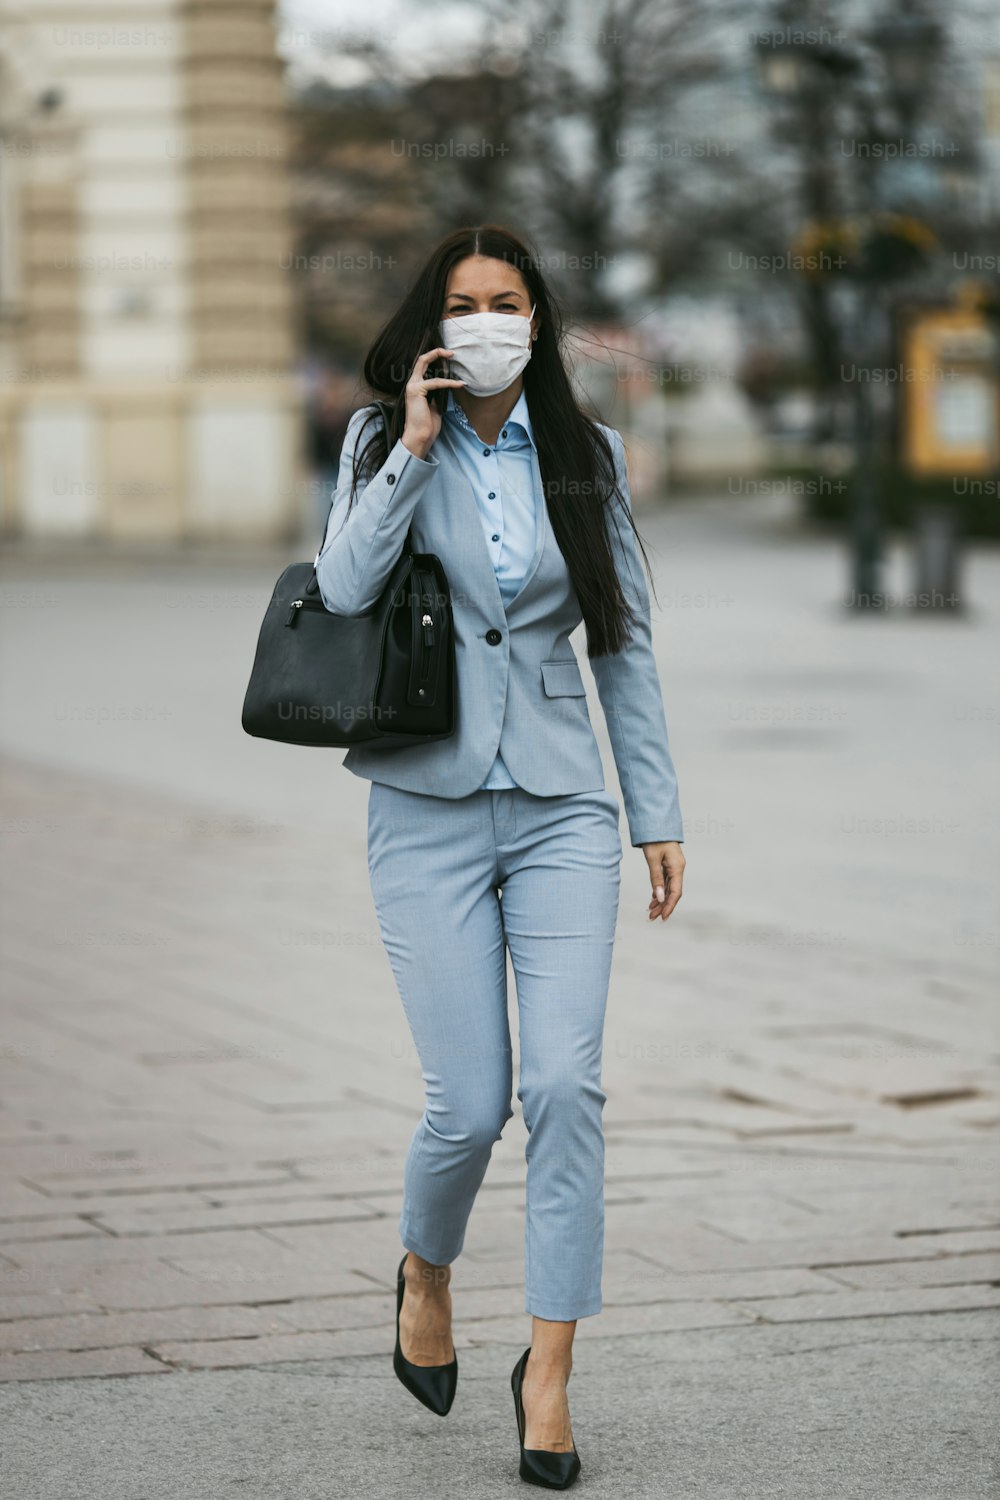 Young and elegant business woman walking on empty city street and wearing protective mask to protect herself from dangerous flu or virus. Corona virus or Covid-19 concept.